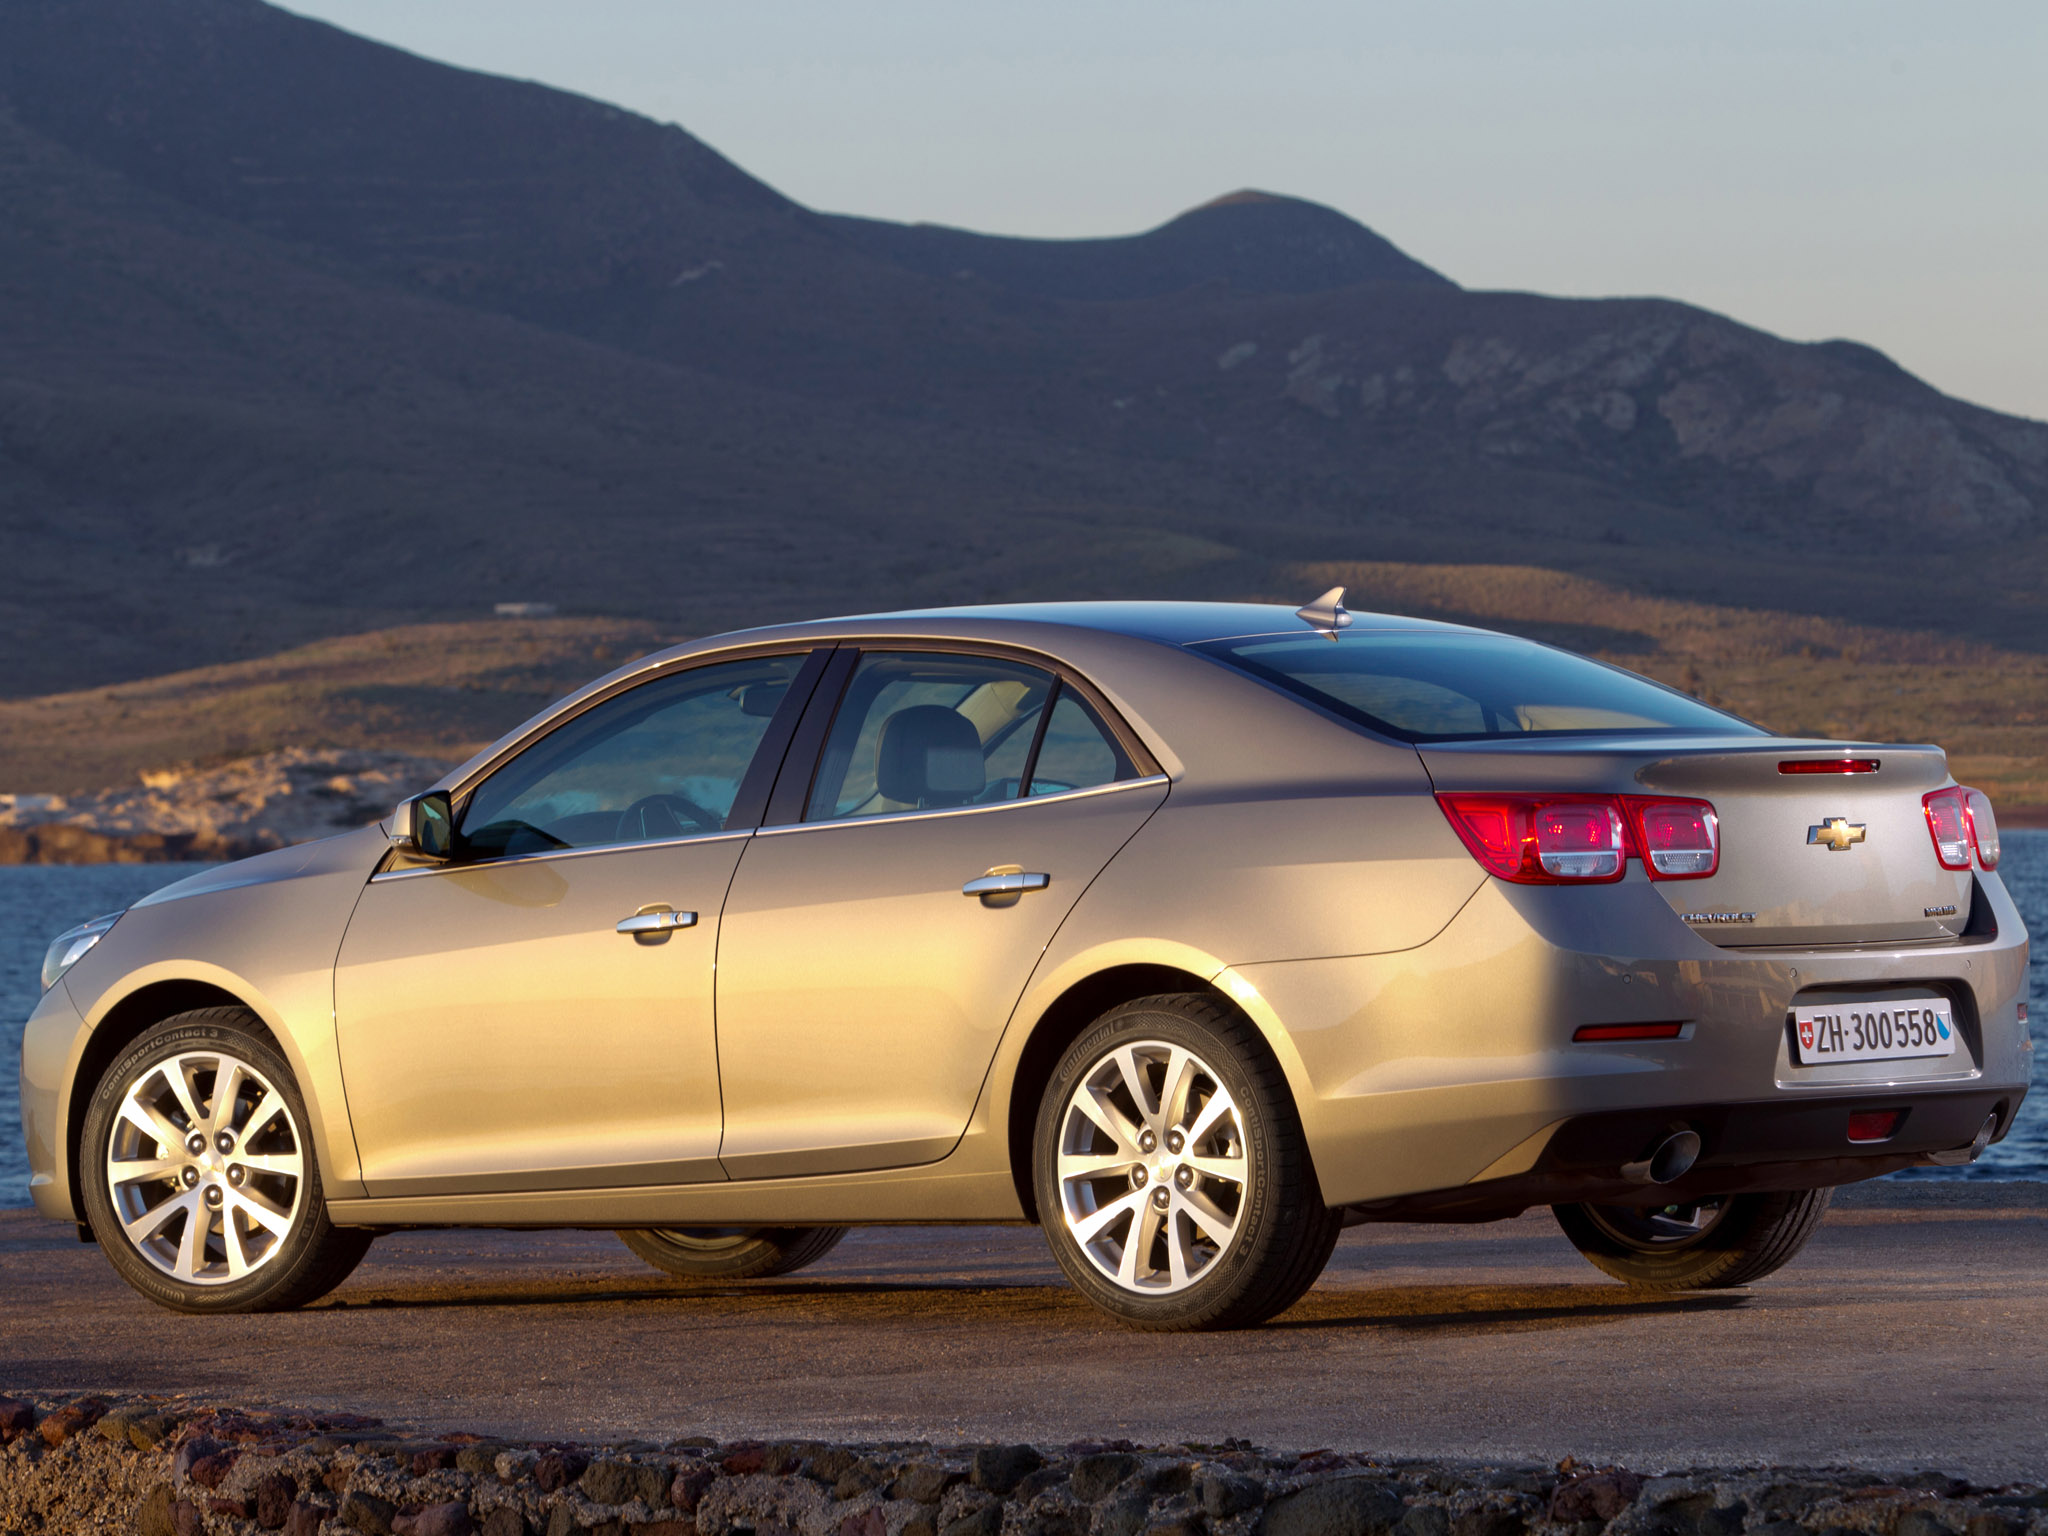 Car in pictures – car photo gallery » Chevrolet Malibu 2012 Photo 02